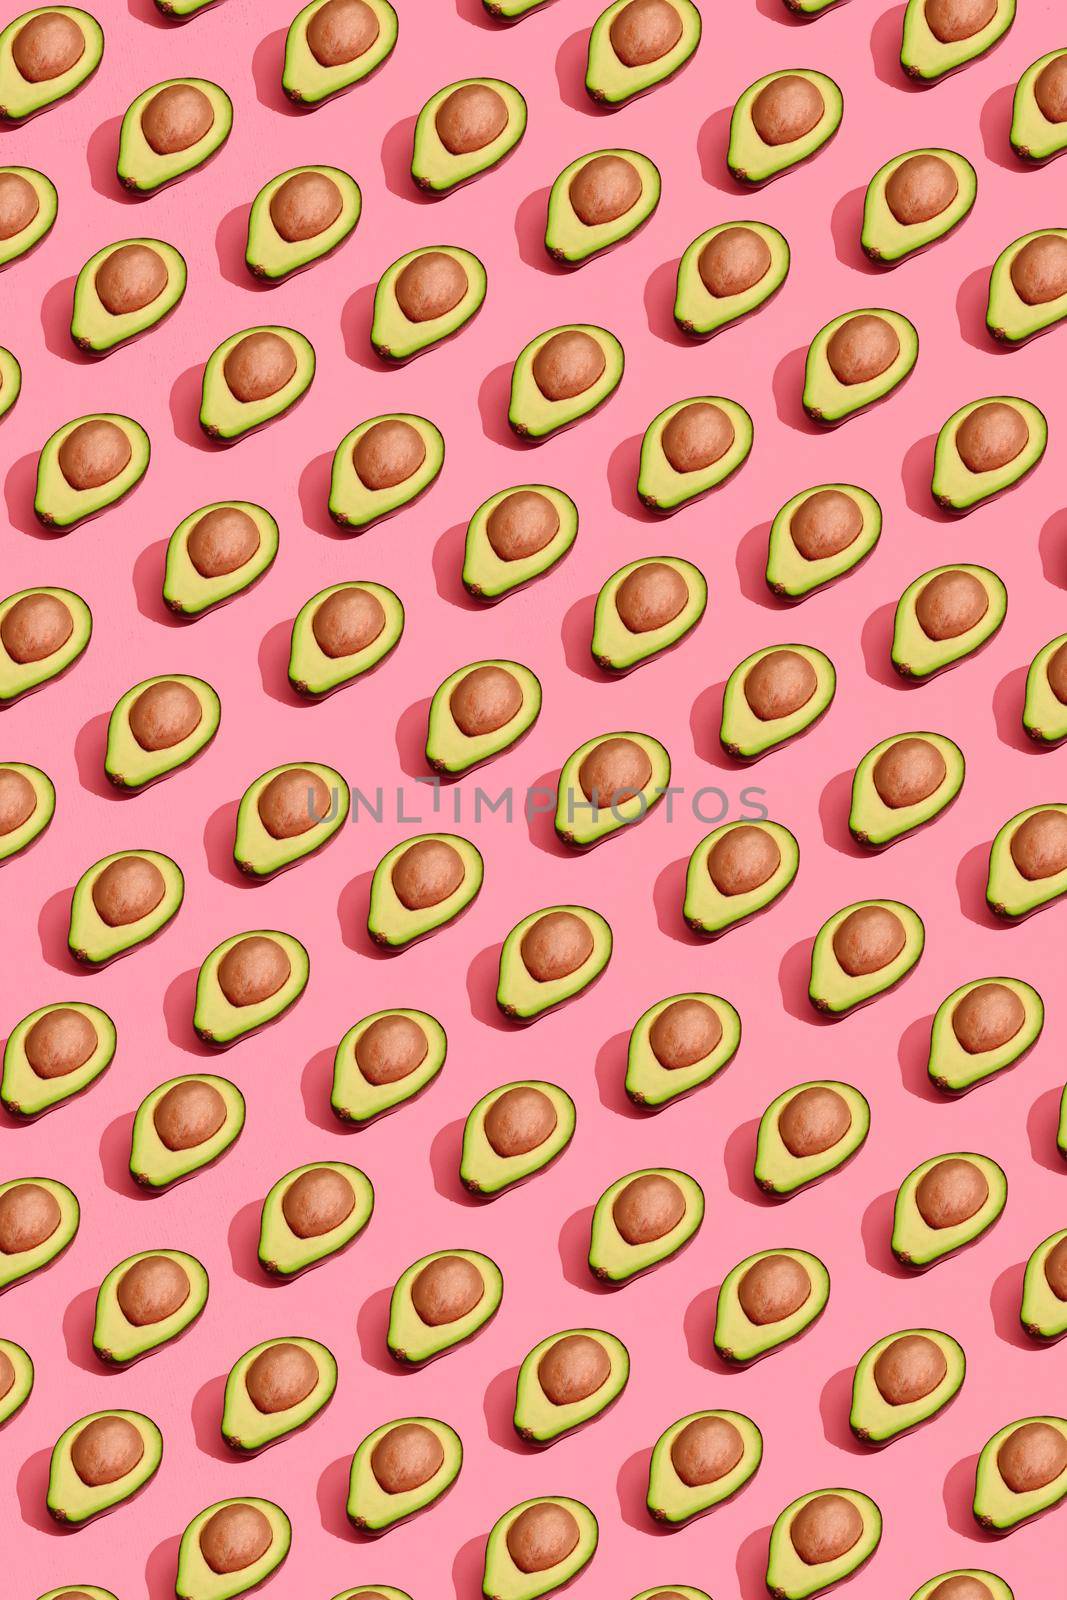 Colorful fruit pattern of fresh cutted avocado halves with pits on coral pink background, top view by nazarovsergey